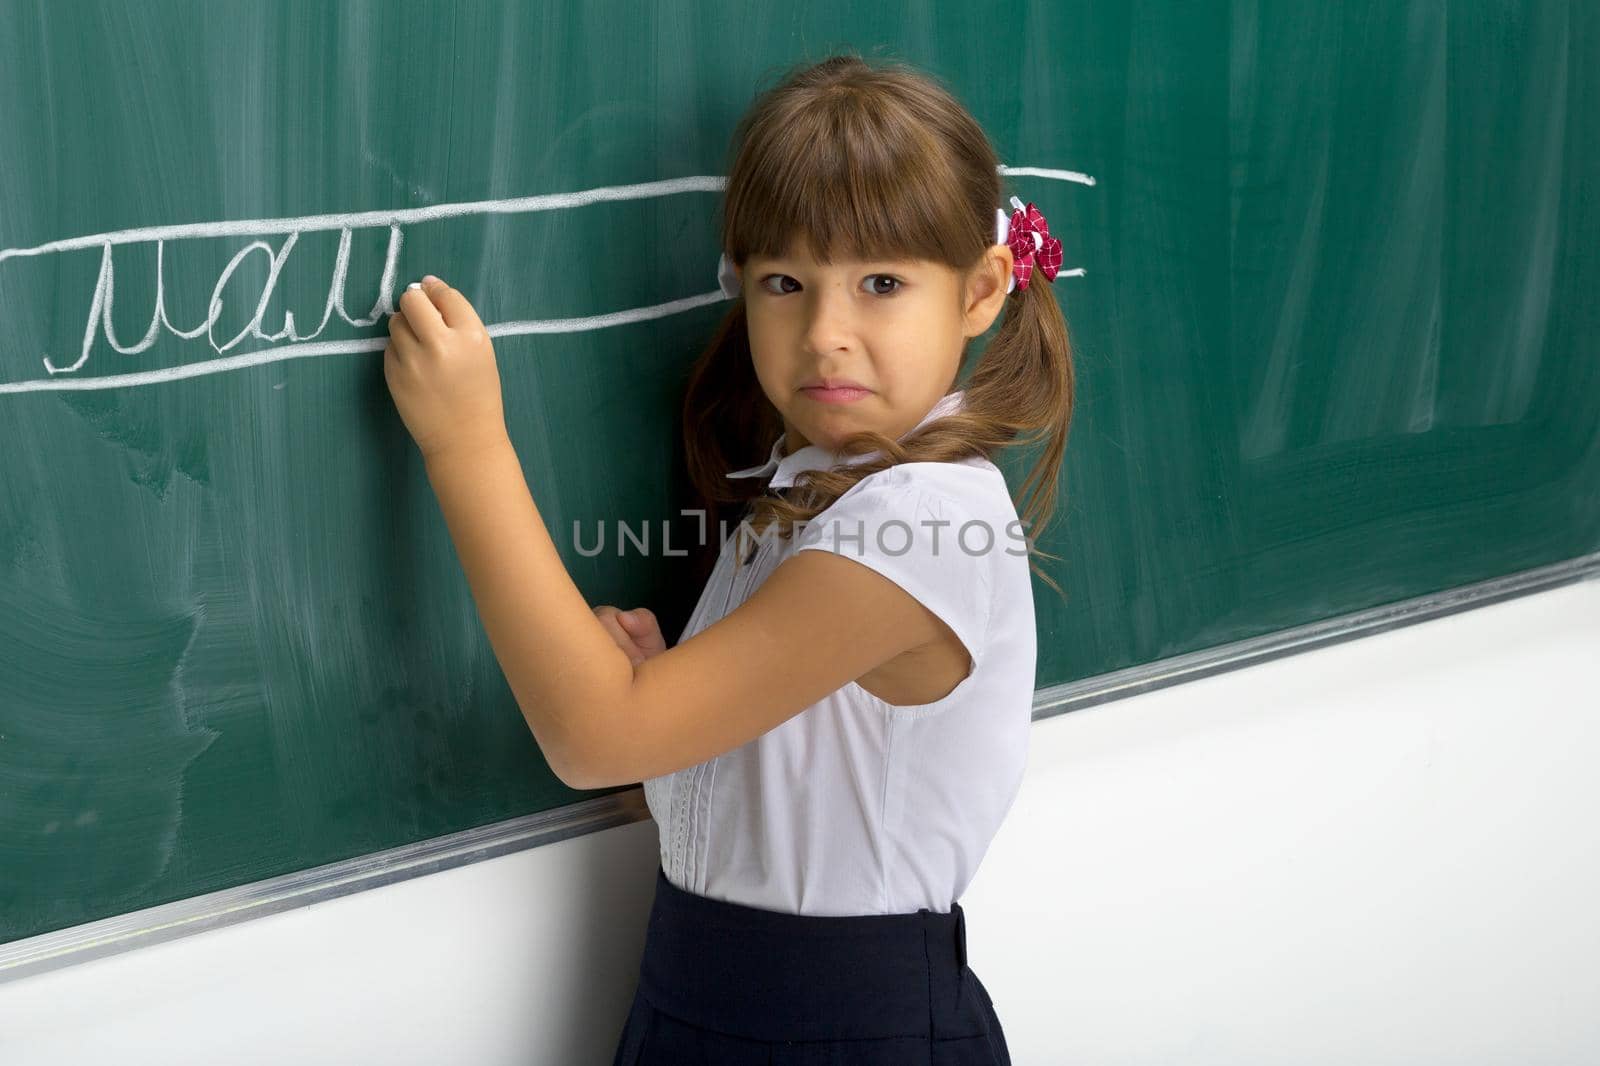 Serious schoolgirl standing at blackboard. Portrait of elementary school student girl in white blouse writing on green chalkboard in classroom and looking at camera. School and education concept